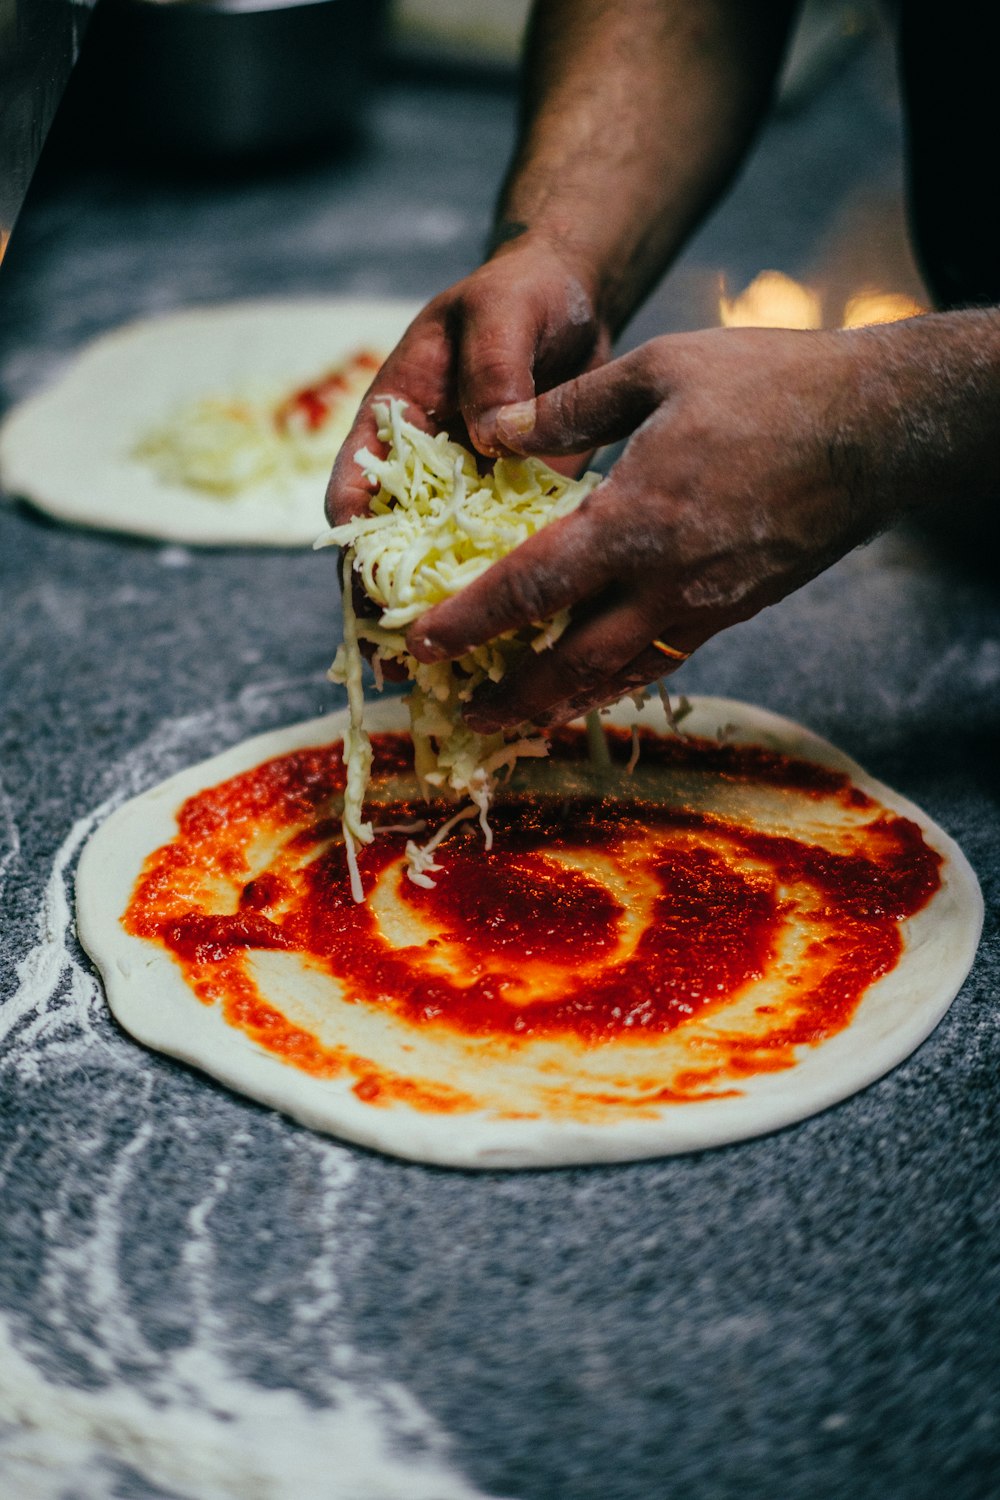 a person is putting sauce on a pizza